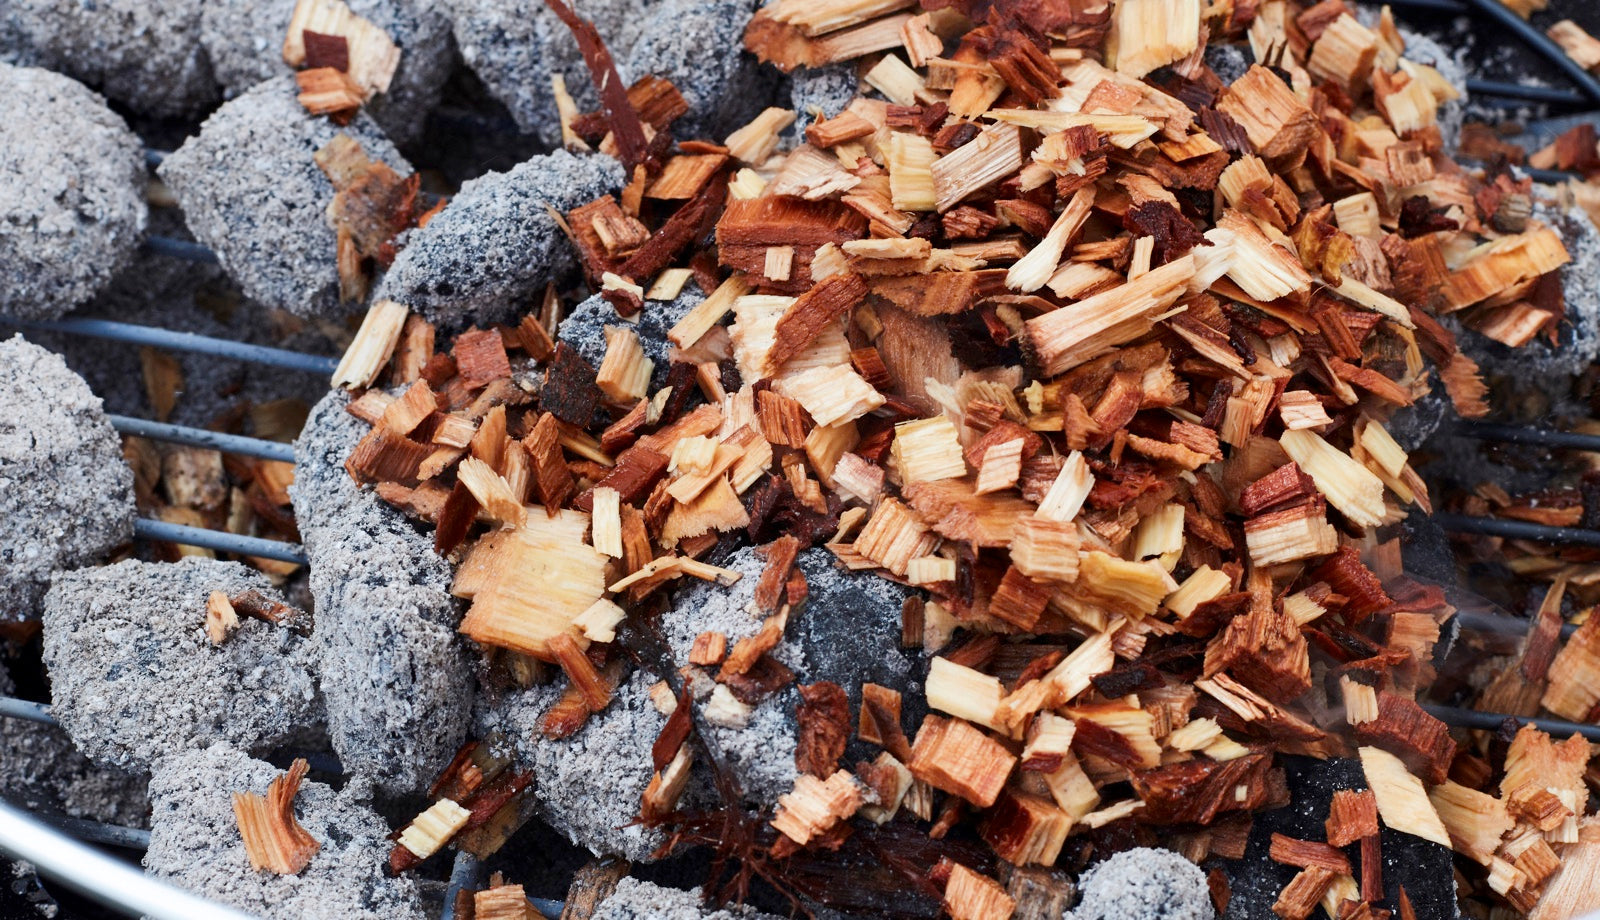 Which wood chunks, smoking chips and smoking dust do you use for which preparations?